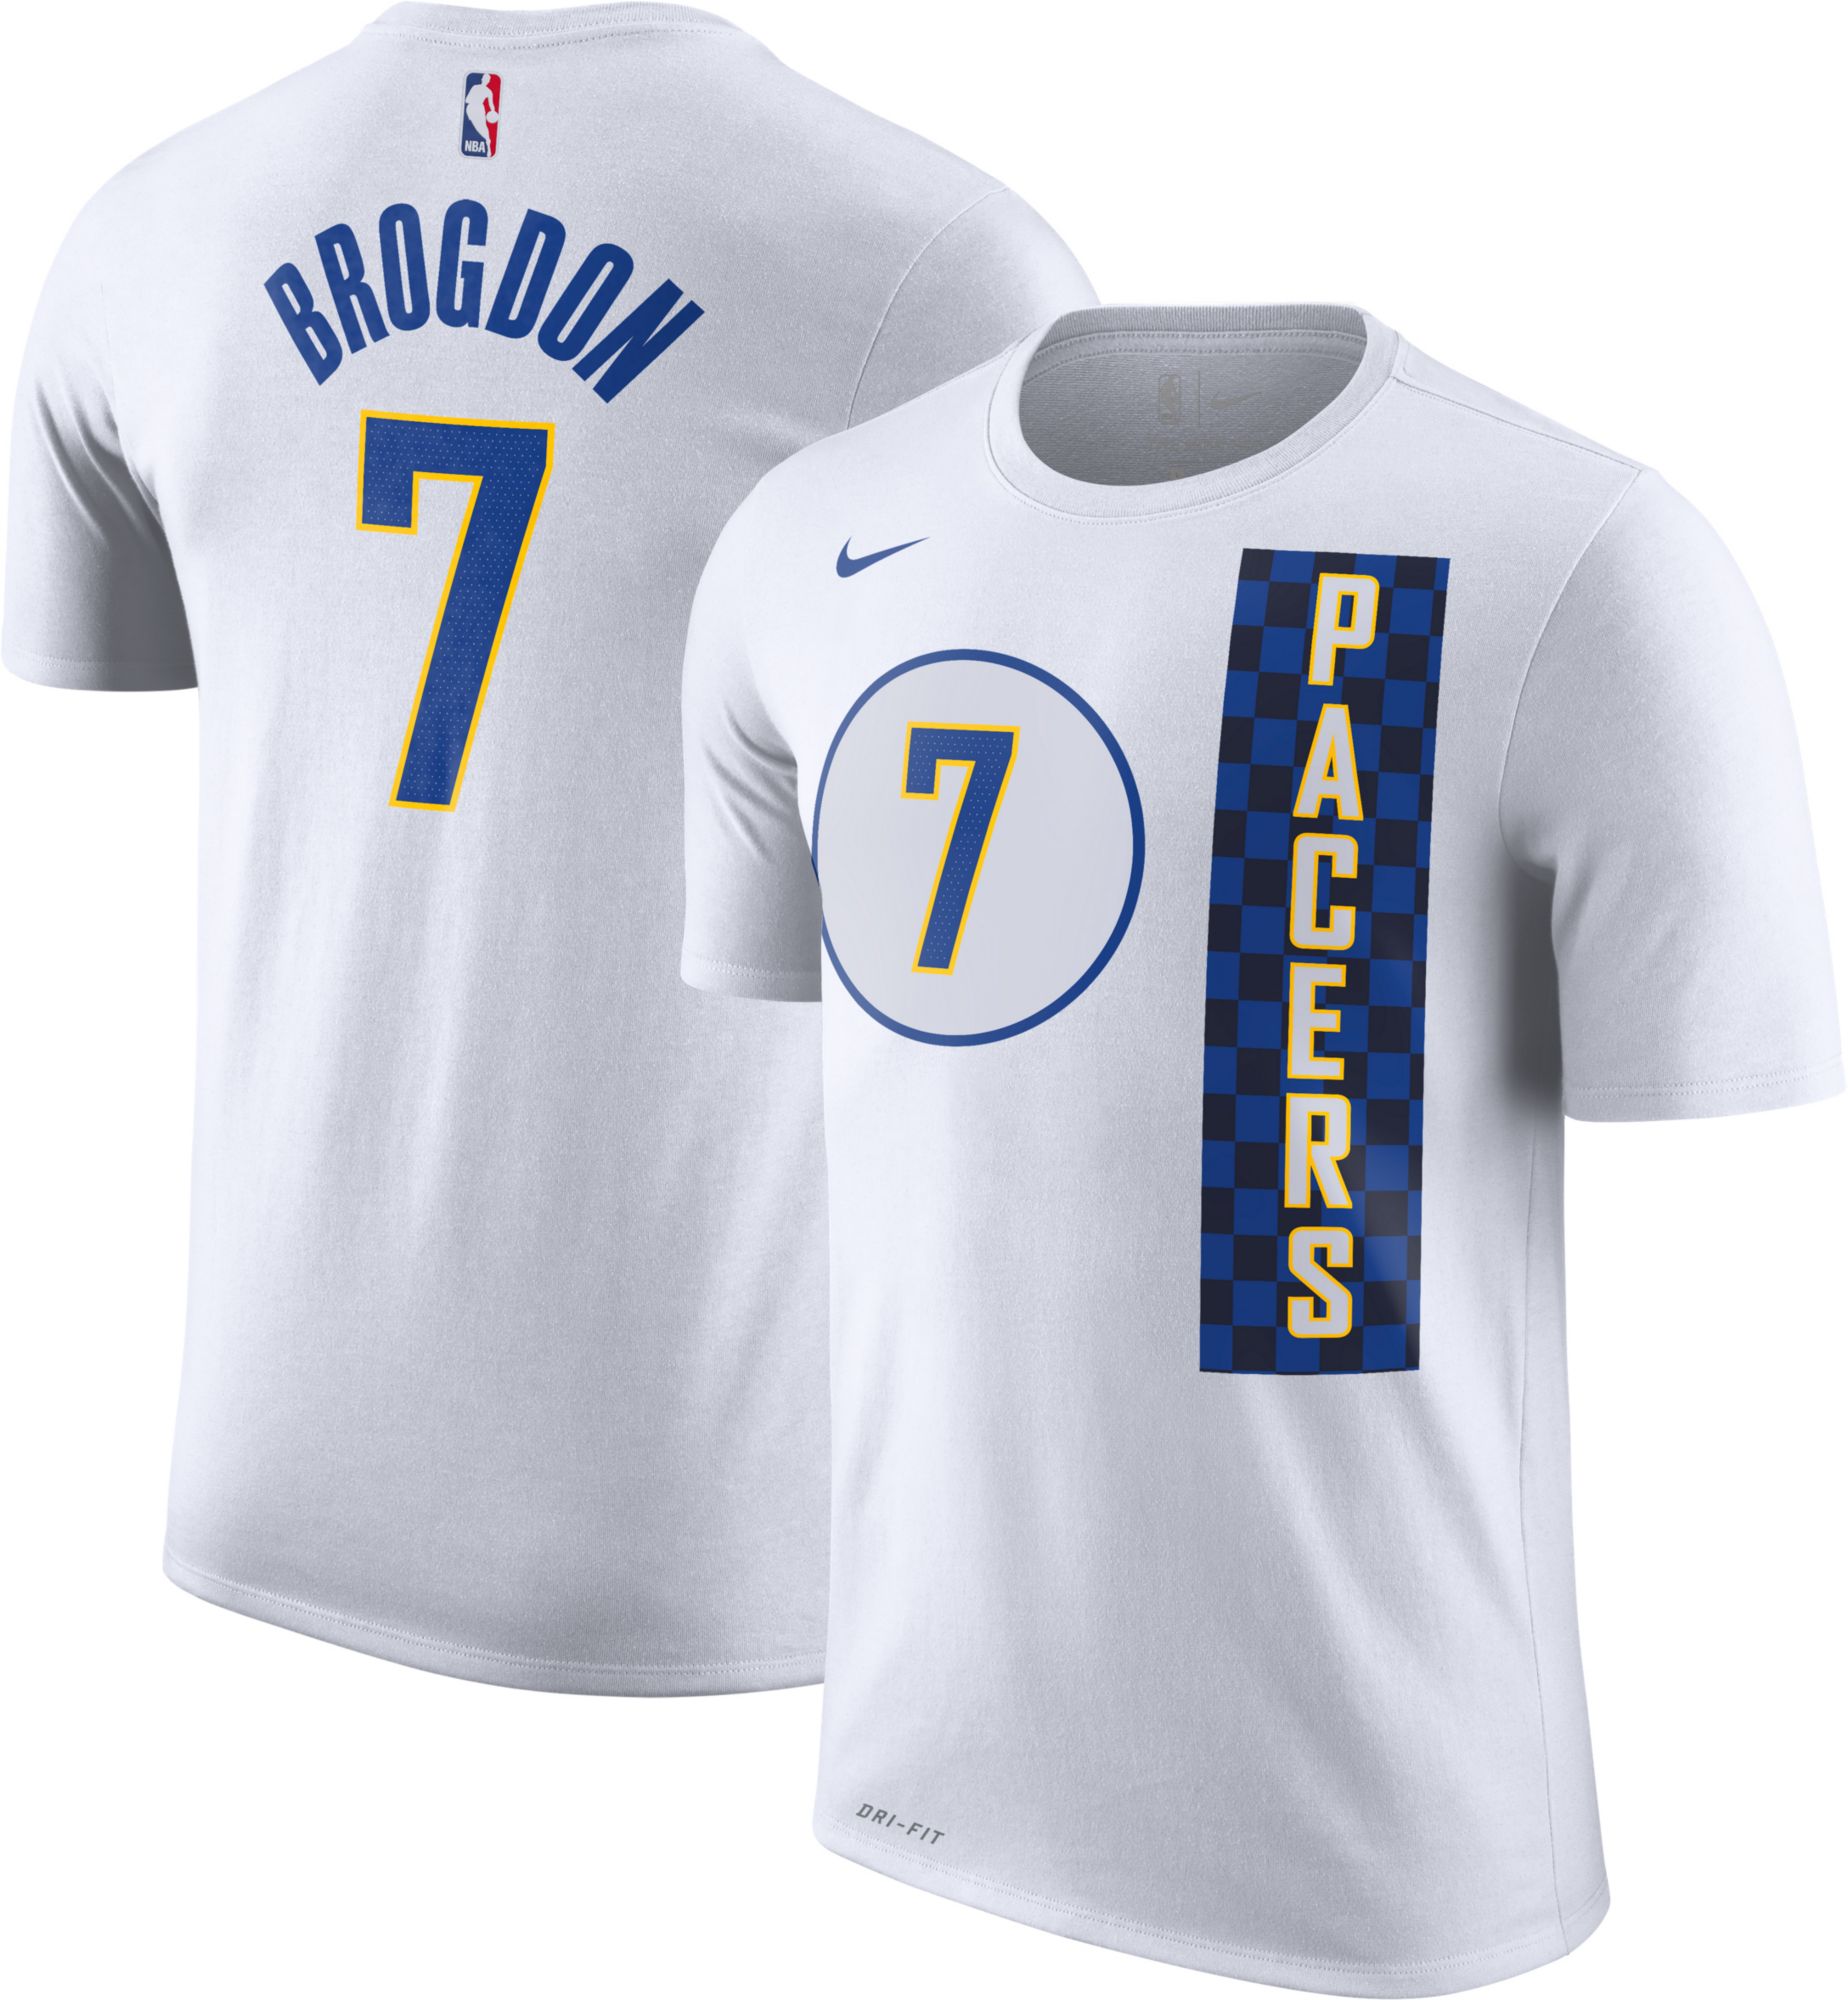 indiana pacers city jersey